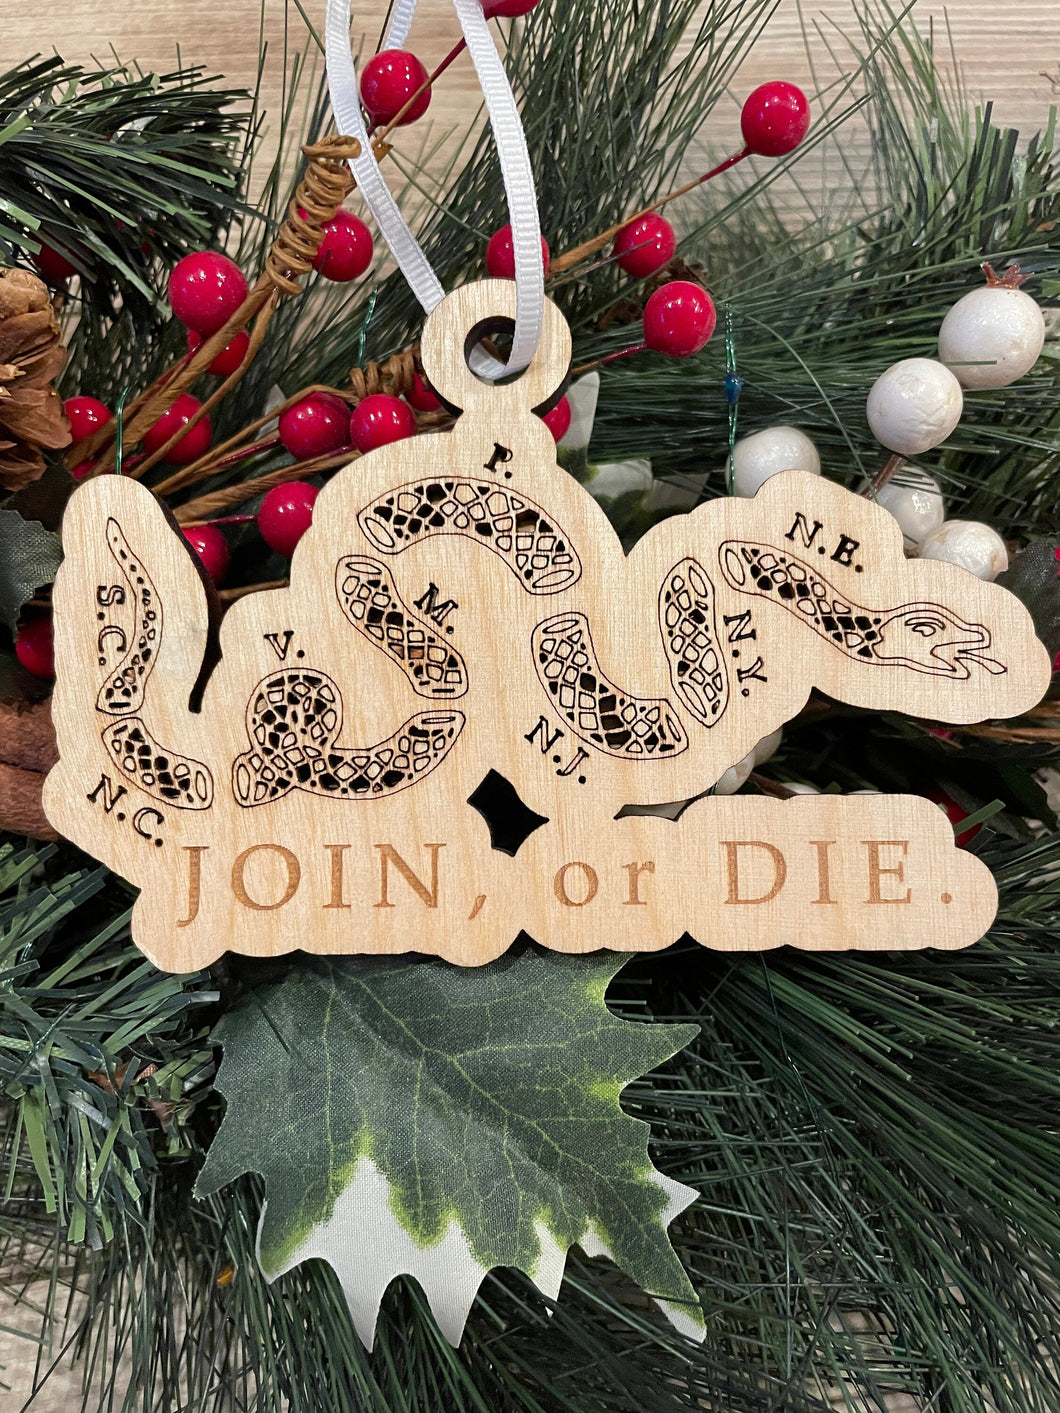 Join or Die Christmas Ornament, Patriotic Ornament, Christmas Ornaments, Come and Take It, Unique Personalized Gifts